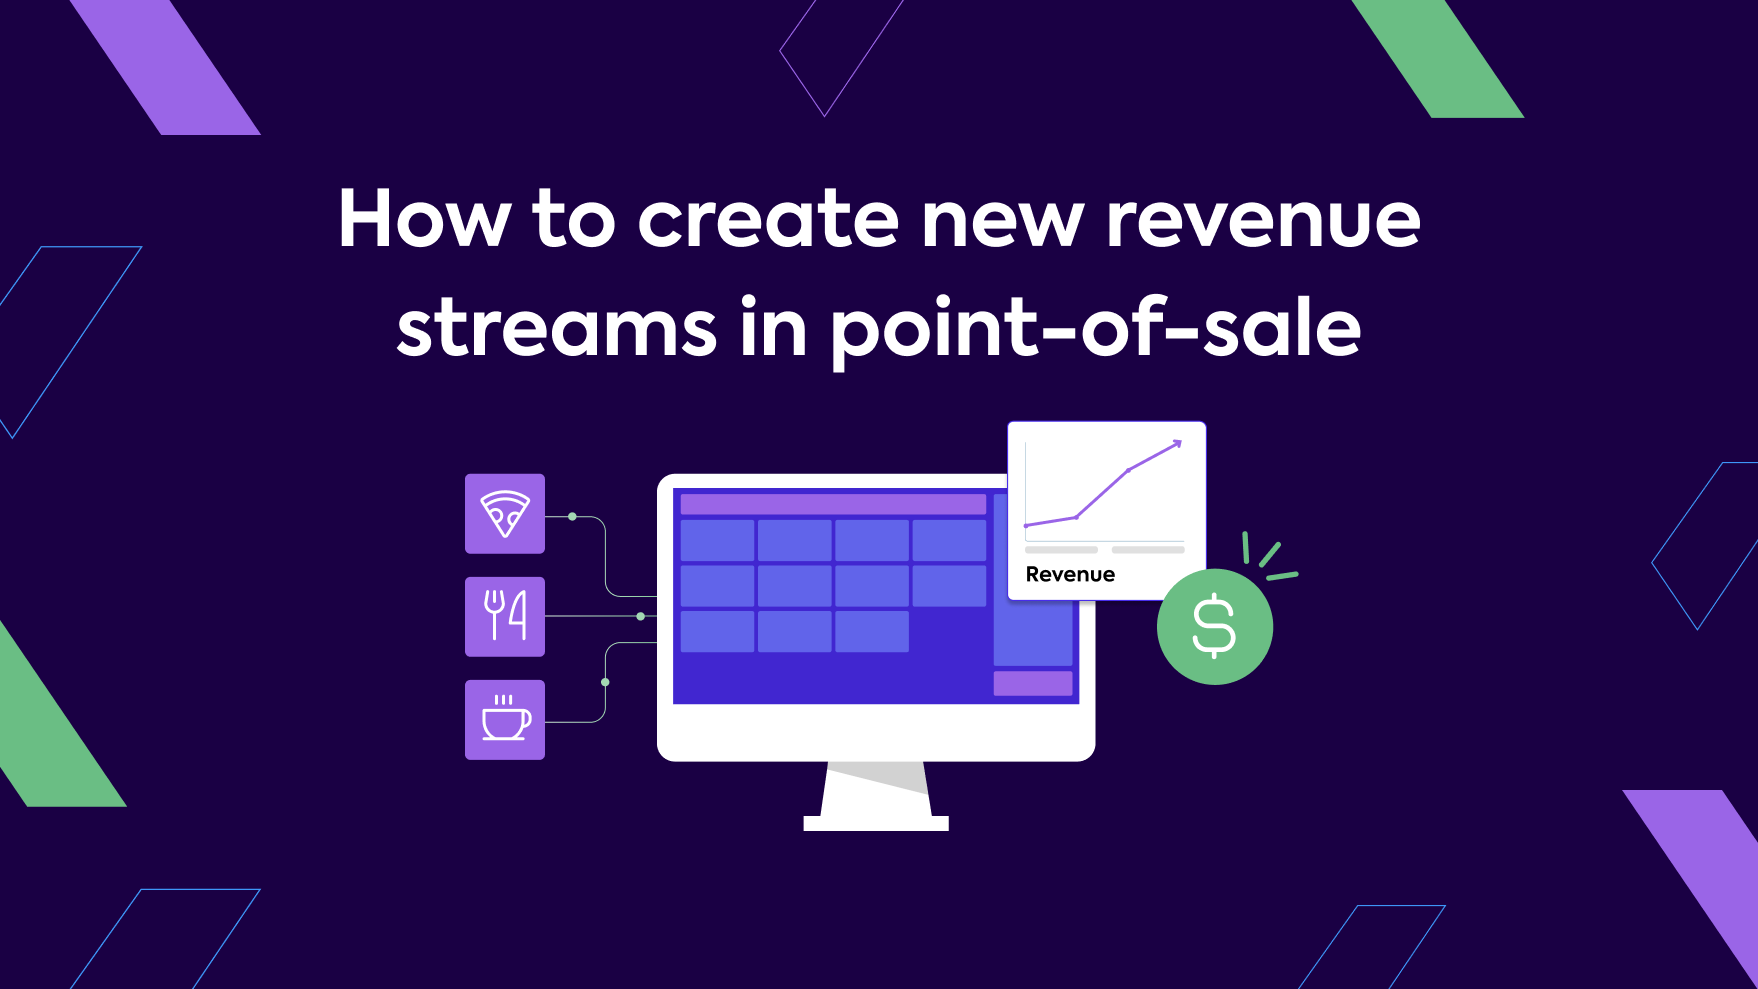 How to create new revenue streams in point-of-sale